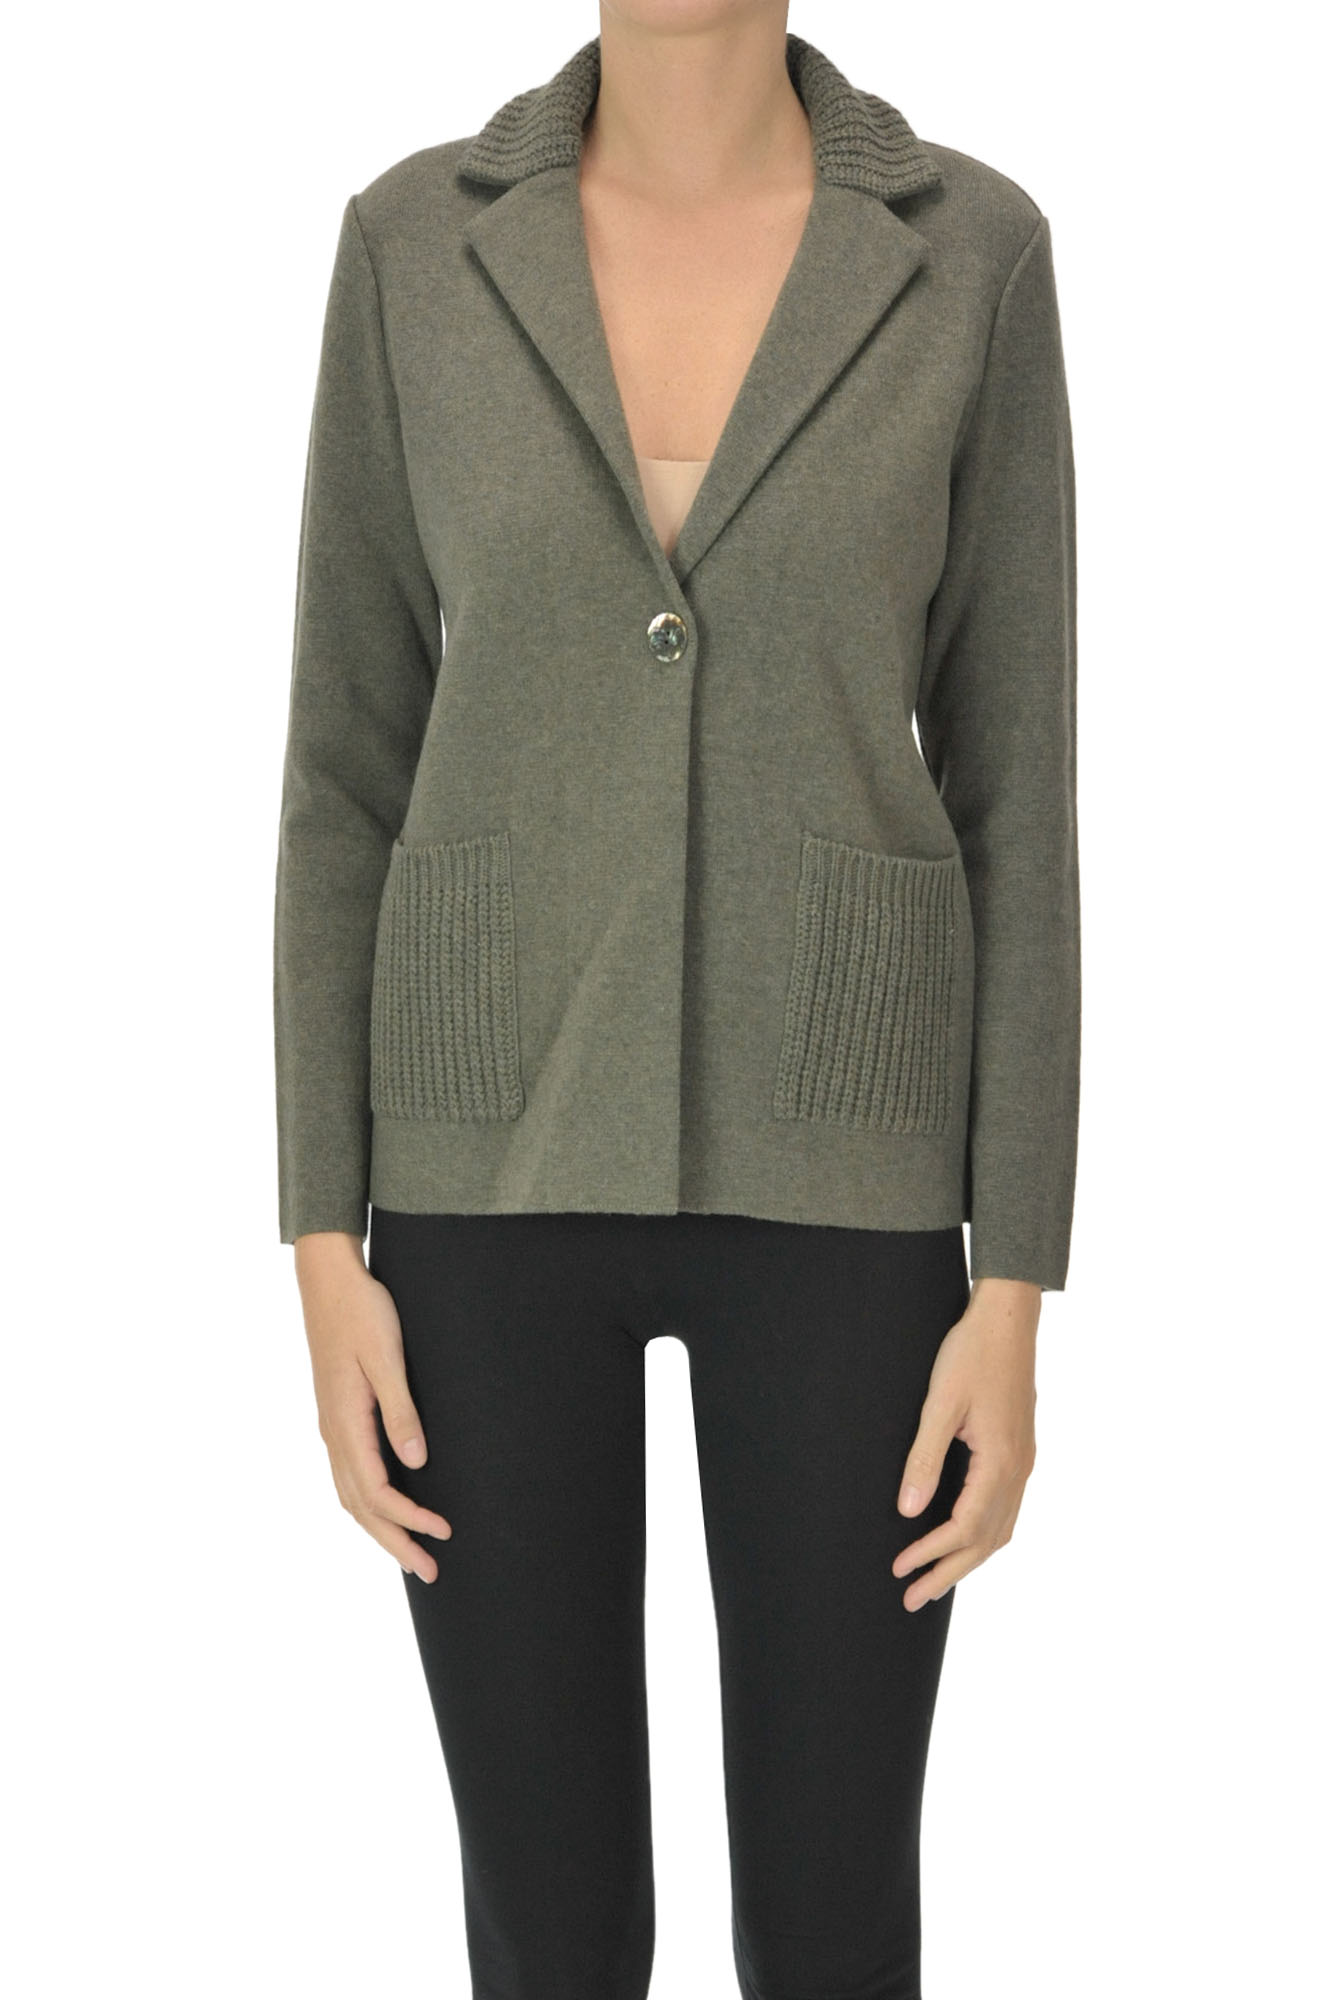 Anneclaire Blazer Style Cardigan In Olive Green